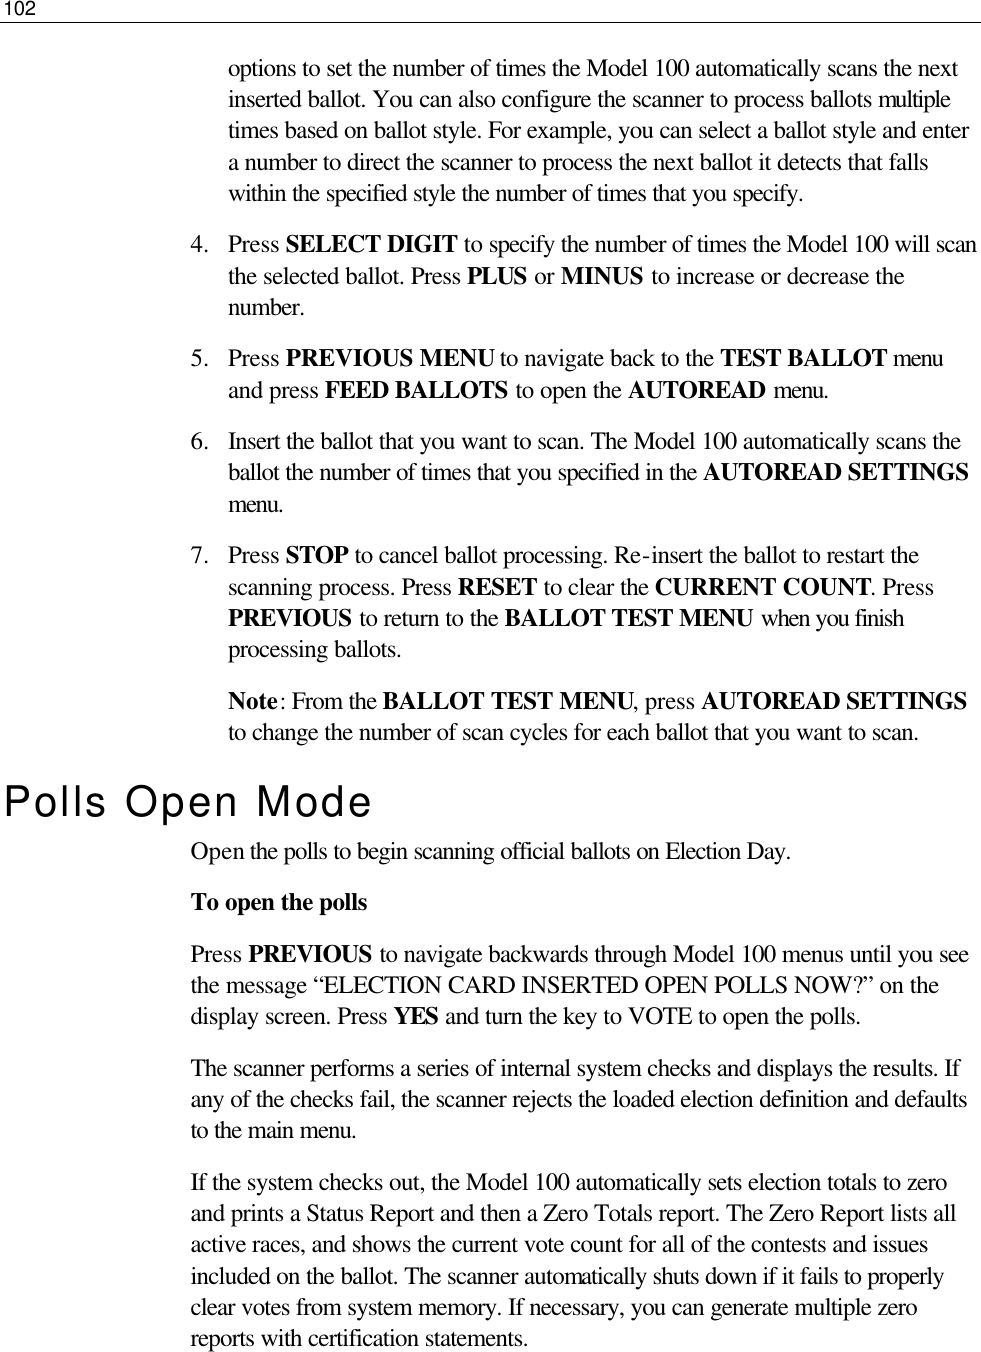 102  options to set the number of times the Model 100 automatically scans the next inserted ballot. You can also configure the scanner to process ballots multiple times based on ballot style. For example, you can select a ballot style and enter a number to direct the scanner to process the next ballot it detects that falls within the specified style the number of times that you specify. 4.  Press SELECT DIGIT to specify the number of times the Model 100 will scan the selected ballot. Press PLUS or MINUS to increase or decrease the number. 5.  Press PREVIOUS MENU to navigate back to the TEST BALLOT menu and press FEED BALLOTS to open the AUTOREAD menu. 6.  Insert the ballot that you want to scan. The Model 100 automatically scans the ballot the number of times that you specified in the AUTOREAD SETTINGS menu. 7.  Press STOP to cancel ballot processing. Re-insert the ballot to restart the scanning process. Press RESET to clear the CURRENT COUNT. Press PREVIOUS to return to the BALLOT TEST MENU when you finish processing ballots. Note: From the BALLOT TEST MENU, press AUTOREAD SETTINGS to change the number of scan cycles for each ballot that you want to scan. Polls Open Mode Open the polls to begin scanning official ballots on Election Day. To open the polls Press PREVIOUS to navigate backwards through Model 100 menus until you see the message “ELECTION CARD INSERTED OPEN POLLS NOW?” on the display screen. Press YES and turn the key to VOTE to open the polls. The scanner performs a series of internal system checks and displays the results. If any of the checks fail, the scanner rejects the loaded election definition and defaults to the main menu.  If the system checks out, the Model 100 automatically sets election totals to zero and prints a Status Report and then a Zero Totals report. The Zero Report lists all active races, and shows the current vote count for all of the contests and issues included on the ballot. The scanner automatically shuts down if it fails to properly clear votes from system memory. If necessary, you can generate multiple zero reports with certification statements. 